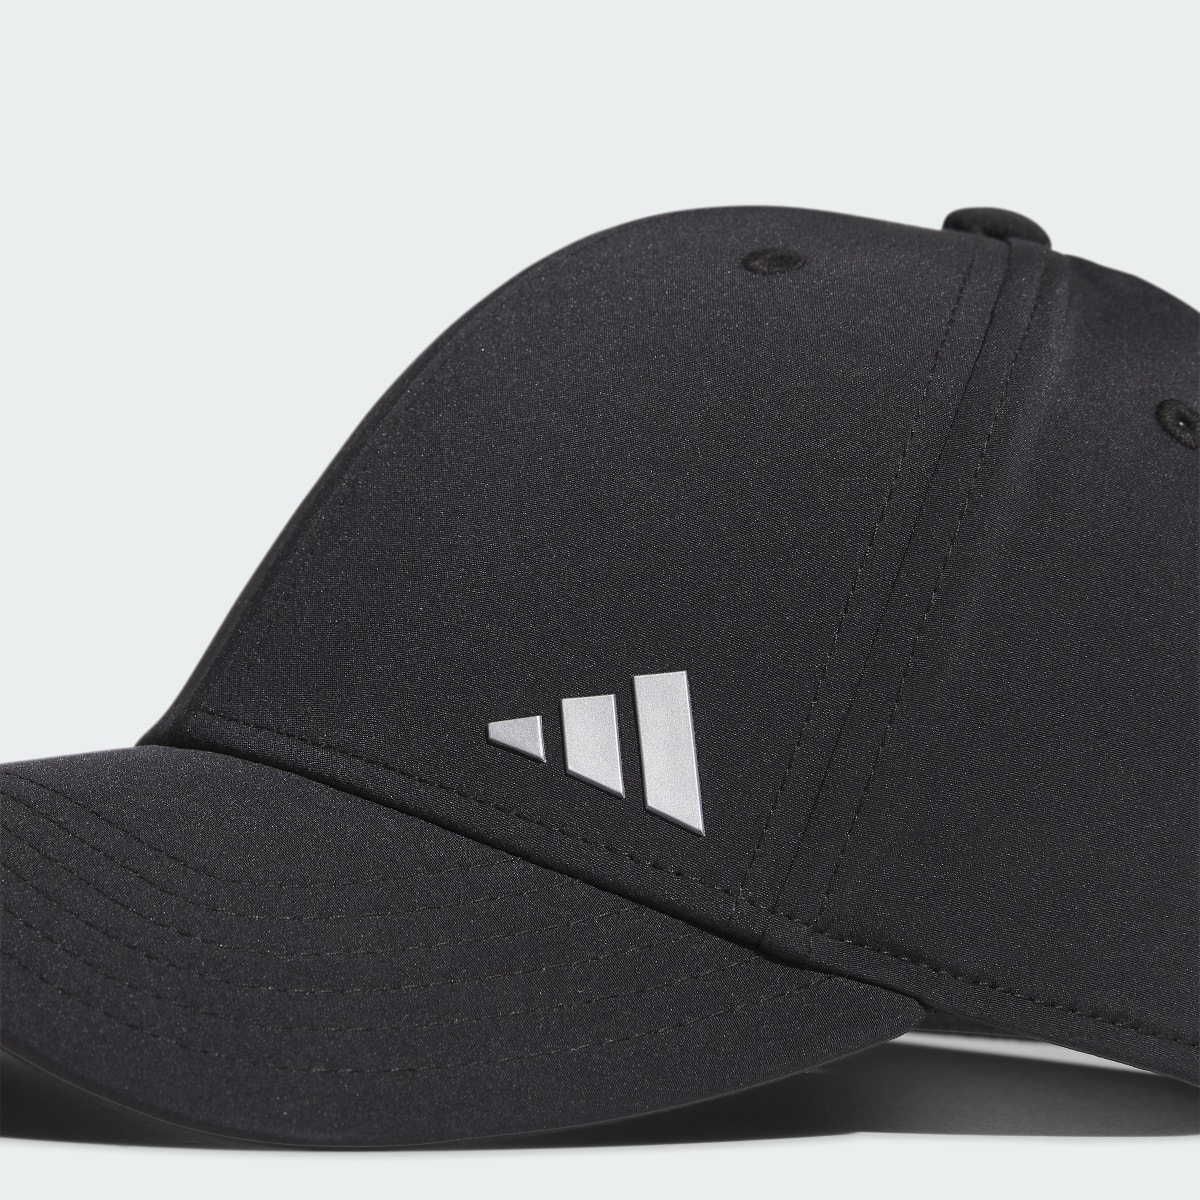 Adidas Backless 2 Hat. 5